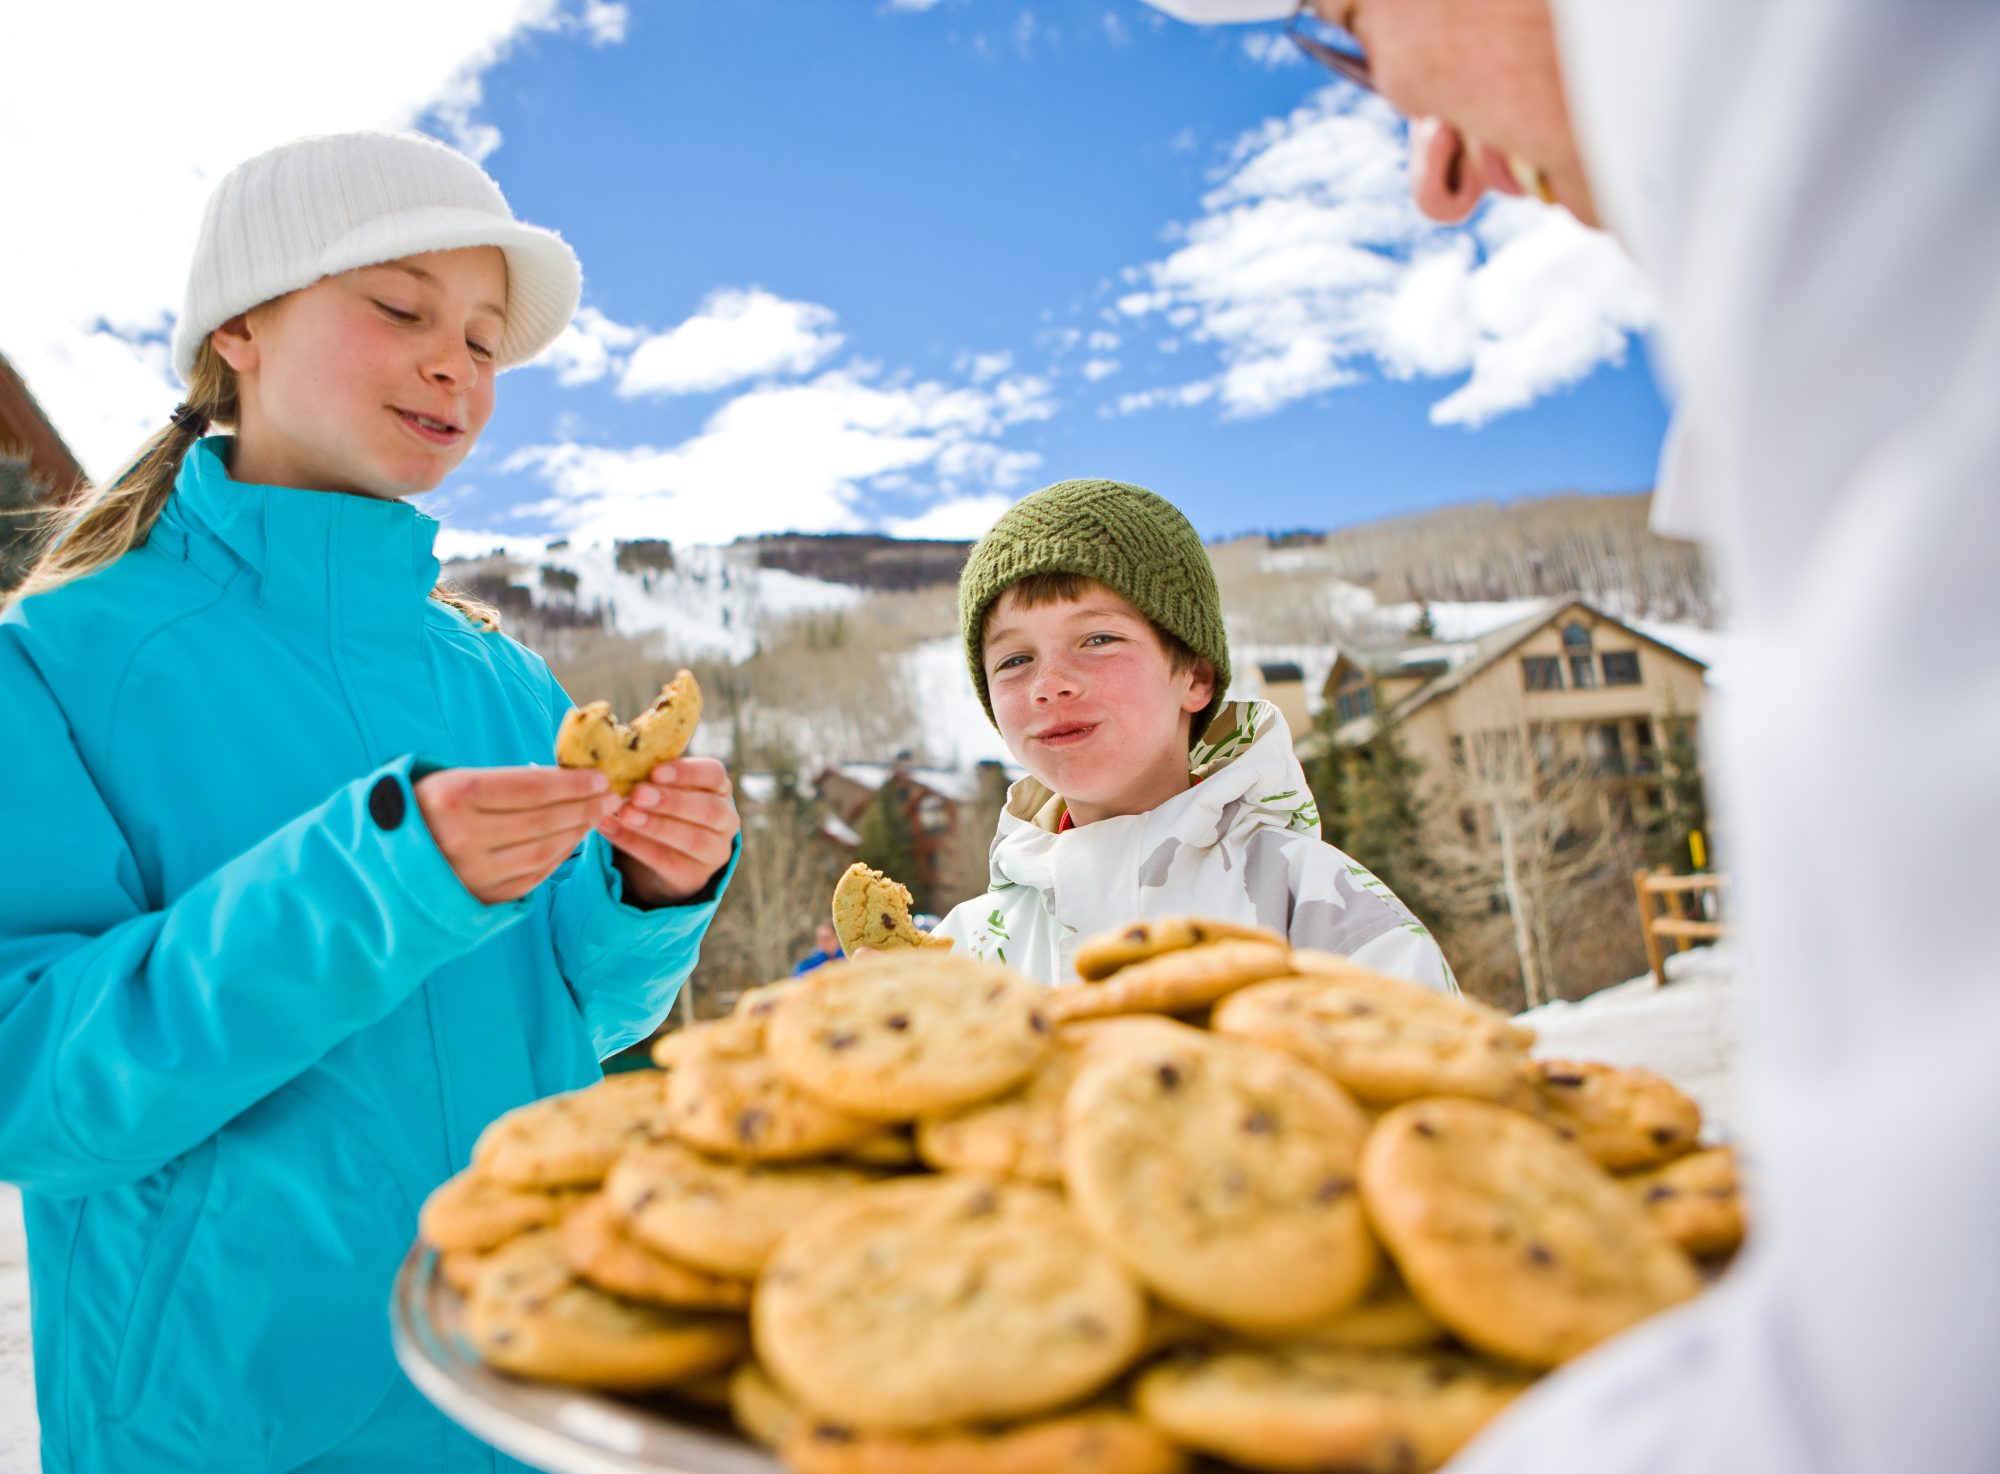 In Beaver Creek, CO, you can get some complimentary cookies. Kids and adults alike, love them! Vail Resorts Commits to $175 Million to $180 Million in Capital Investments to Reimagine the Guest Experience for the 2019-20 Season.